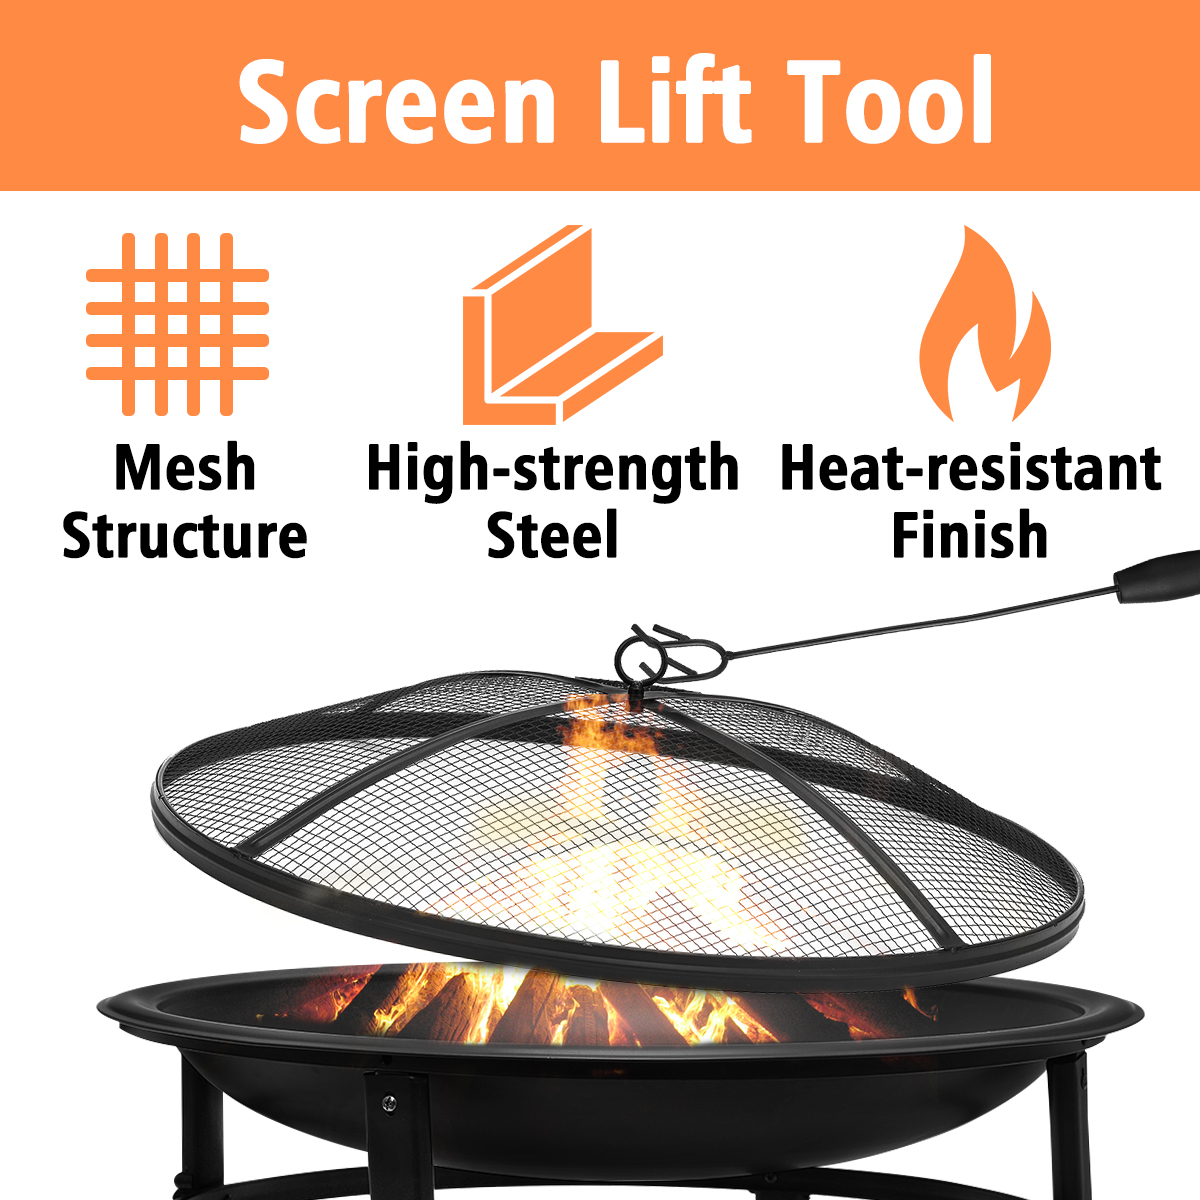 Kingso-26-inch-Fire-Pit-Wood-Burning--Small--Heavy-Duty-Steel-Firepit-with-Spark-Screen-Log-Grate-Po-1822387-2